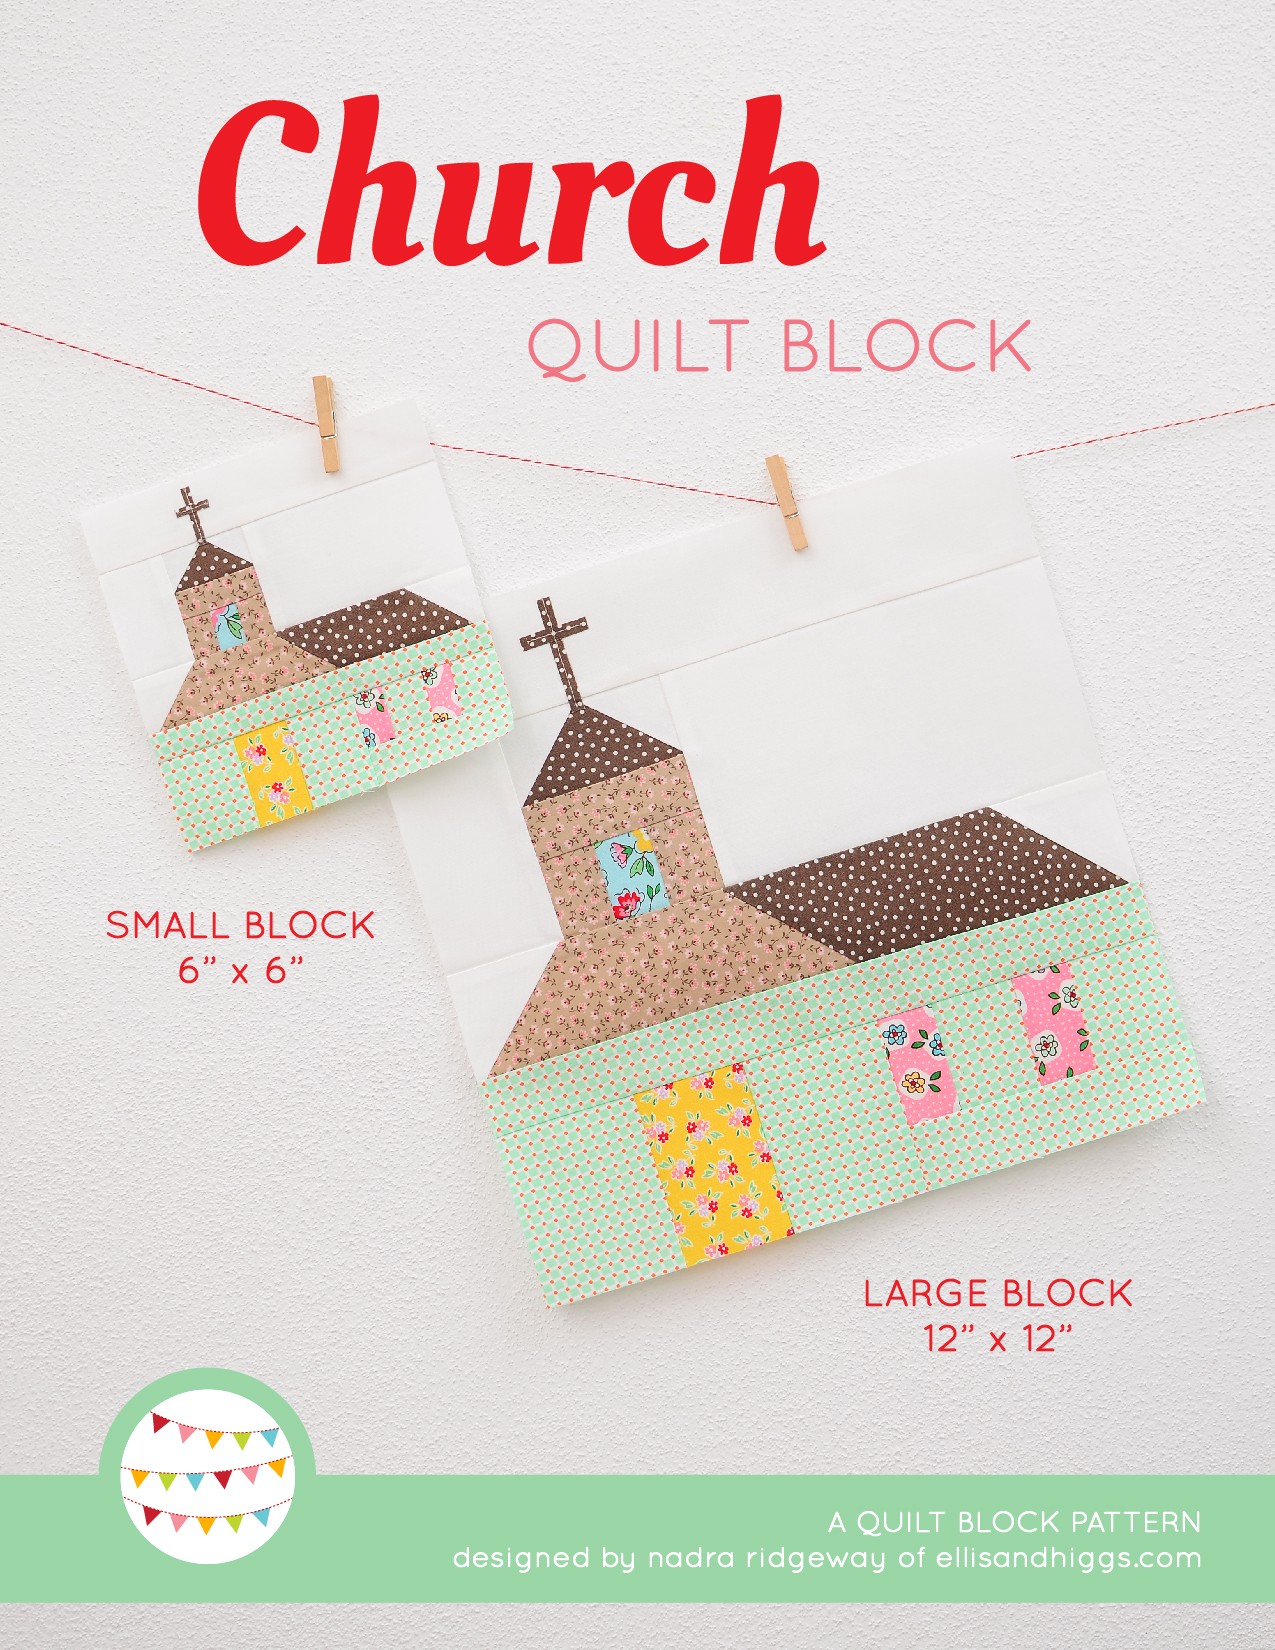 Church quilt block in two sizes hanging on a wall